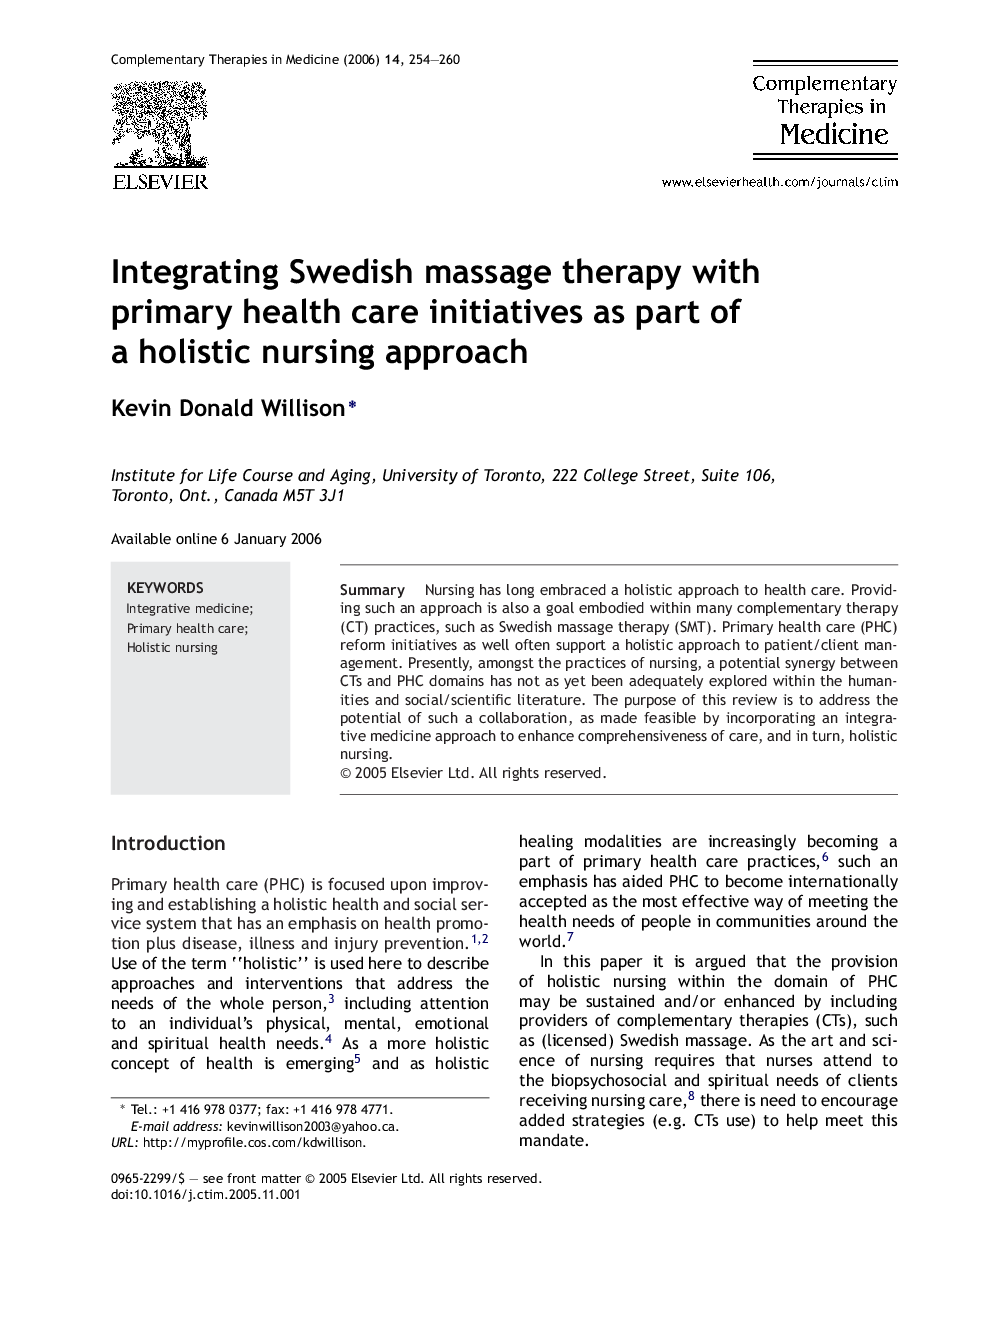 Integrating Swedish massage therapy with primary health care initiatives as part of a holistic nursing approach